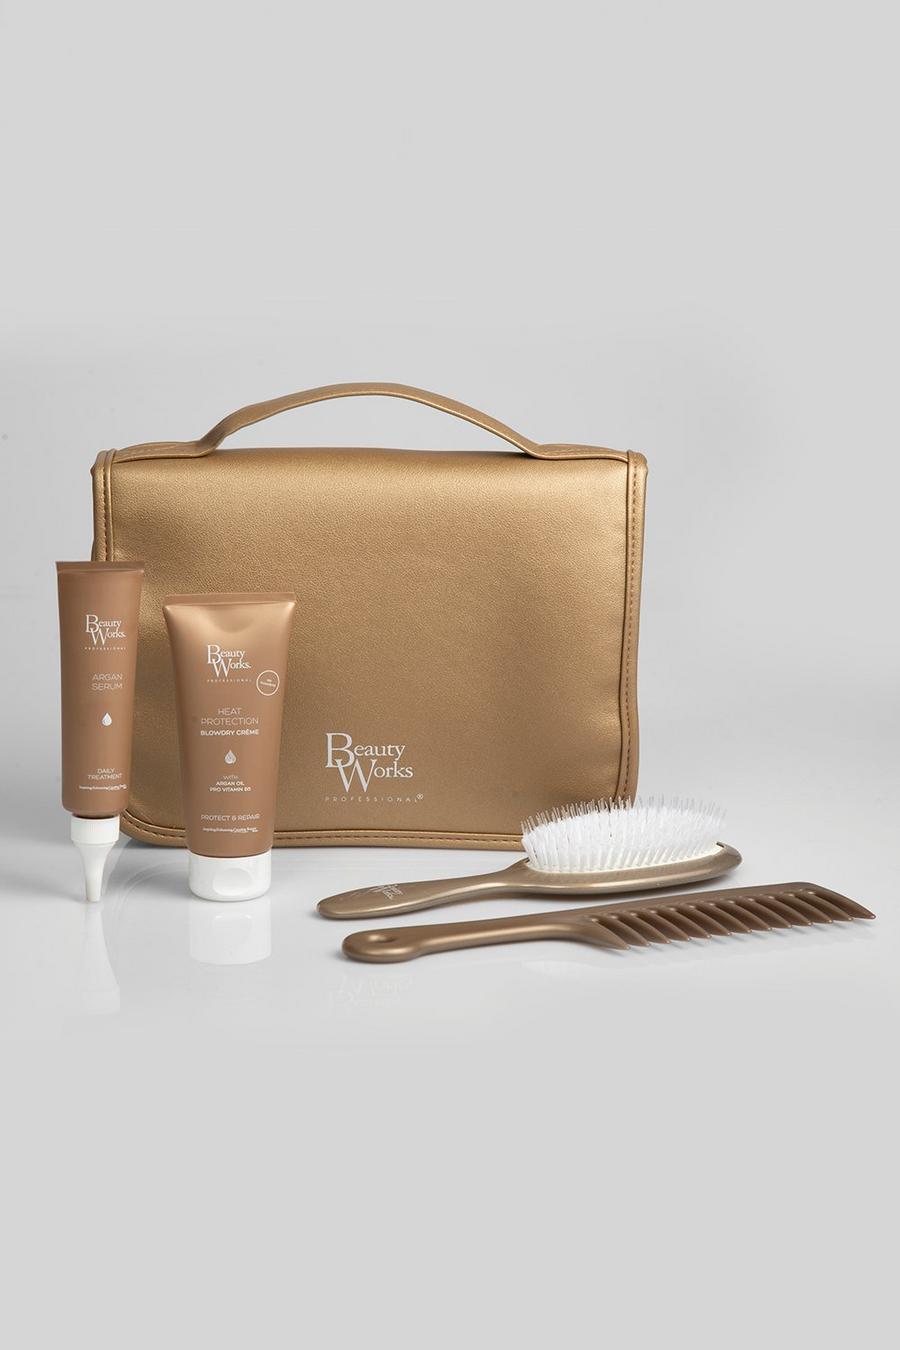 Beauty Works - Kit per capelli Mane Attraction, Gold metallic